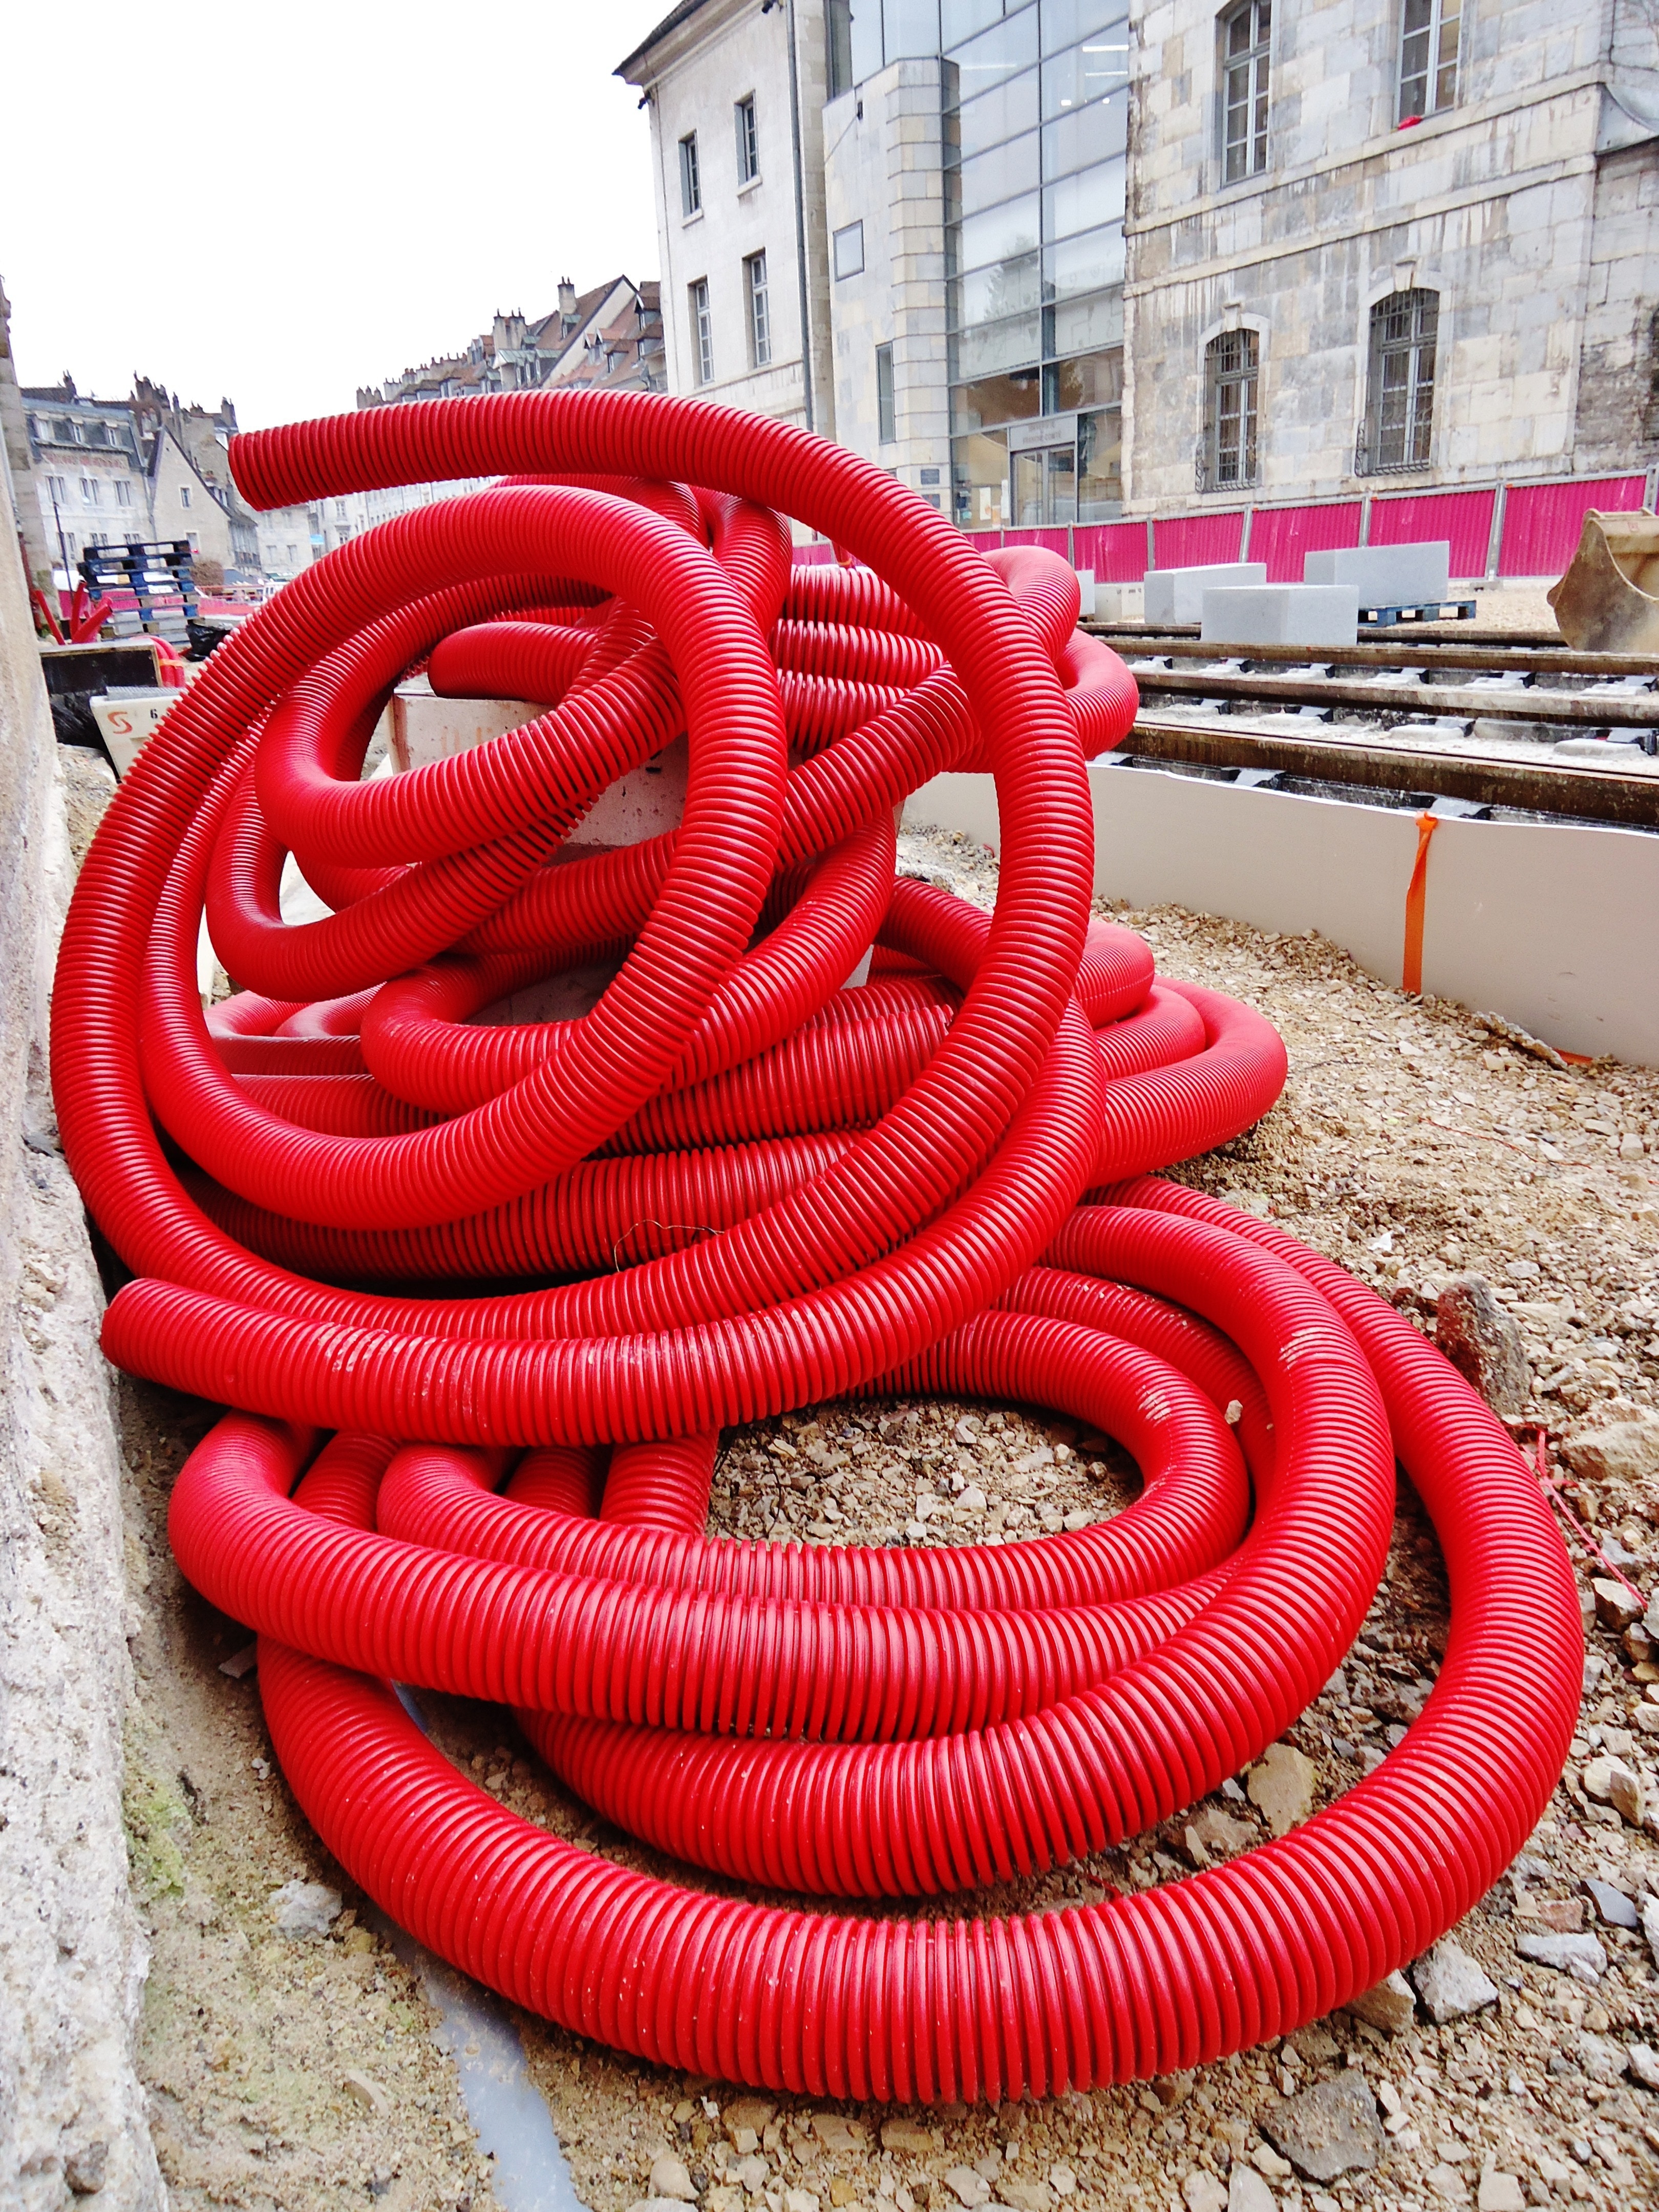 red flexible hose on ground